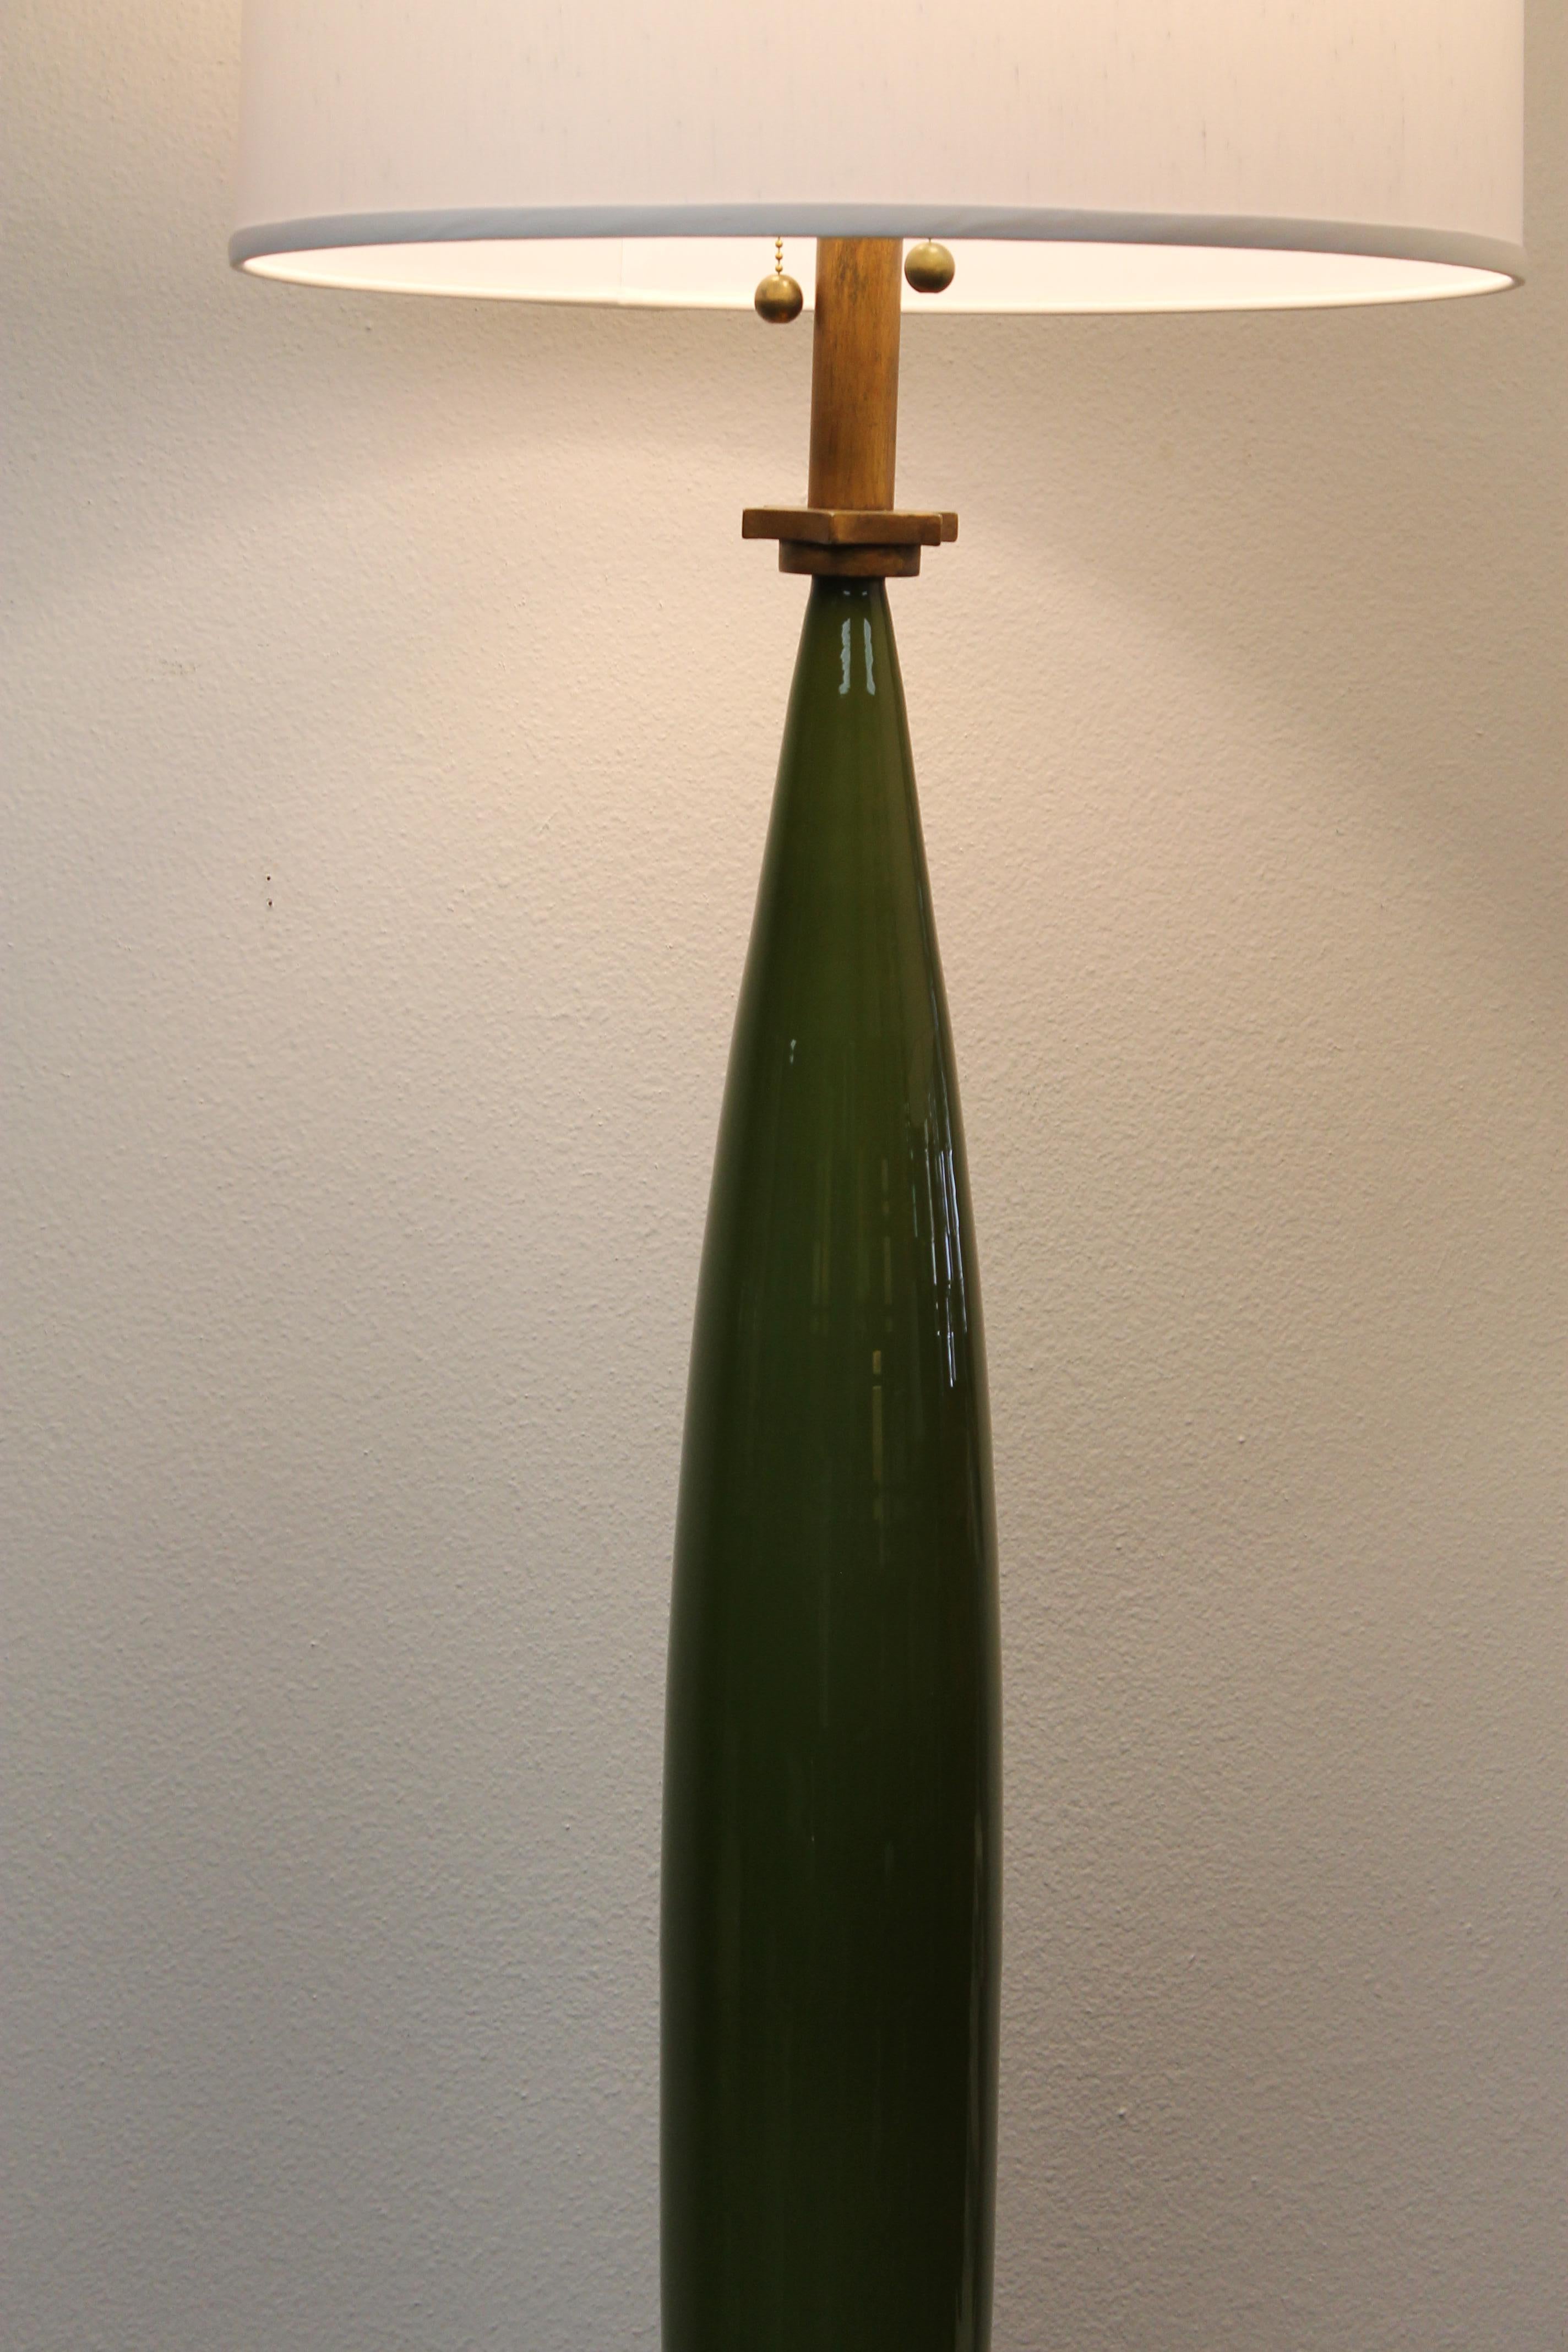 Rocket style green glass lamp on wood base, possibly Italian. Looks like it came out of a 1960s movie set. Measures: Green glass portion is 36.5